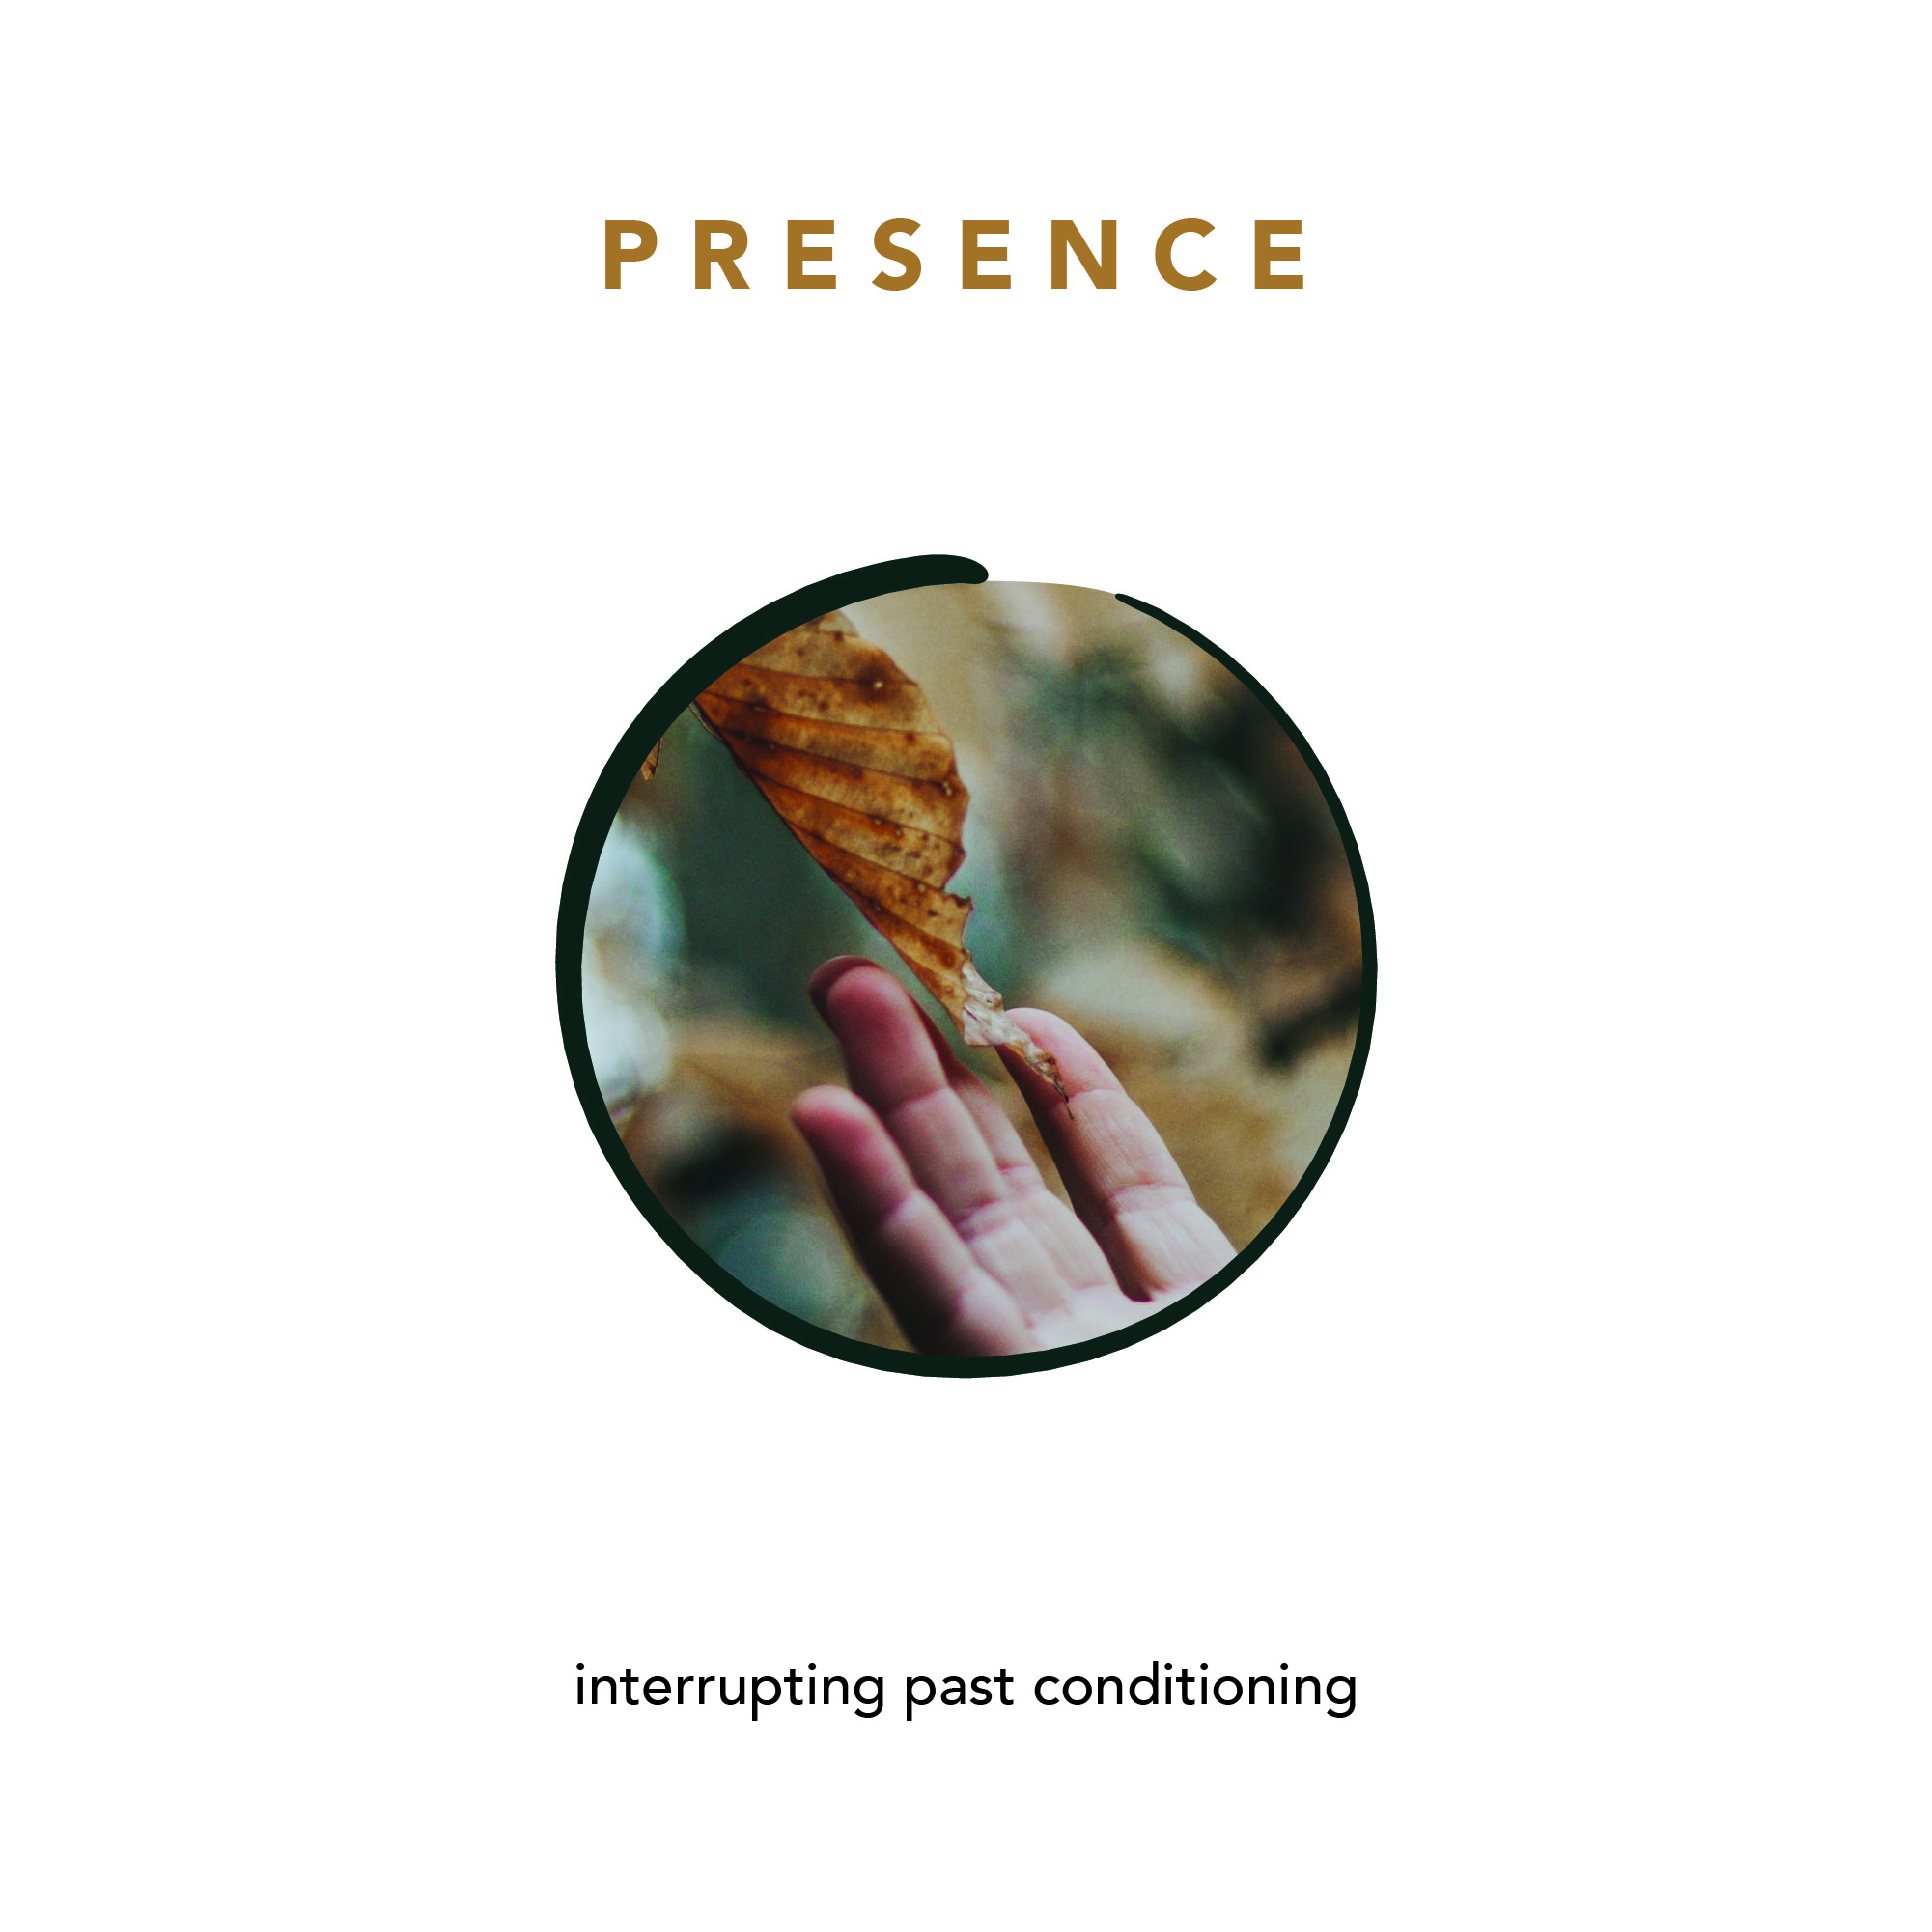 😍 PRESENCE - interrupting patterns of past worries and future anxieties